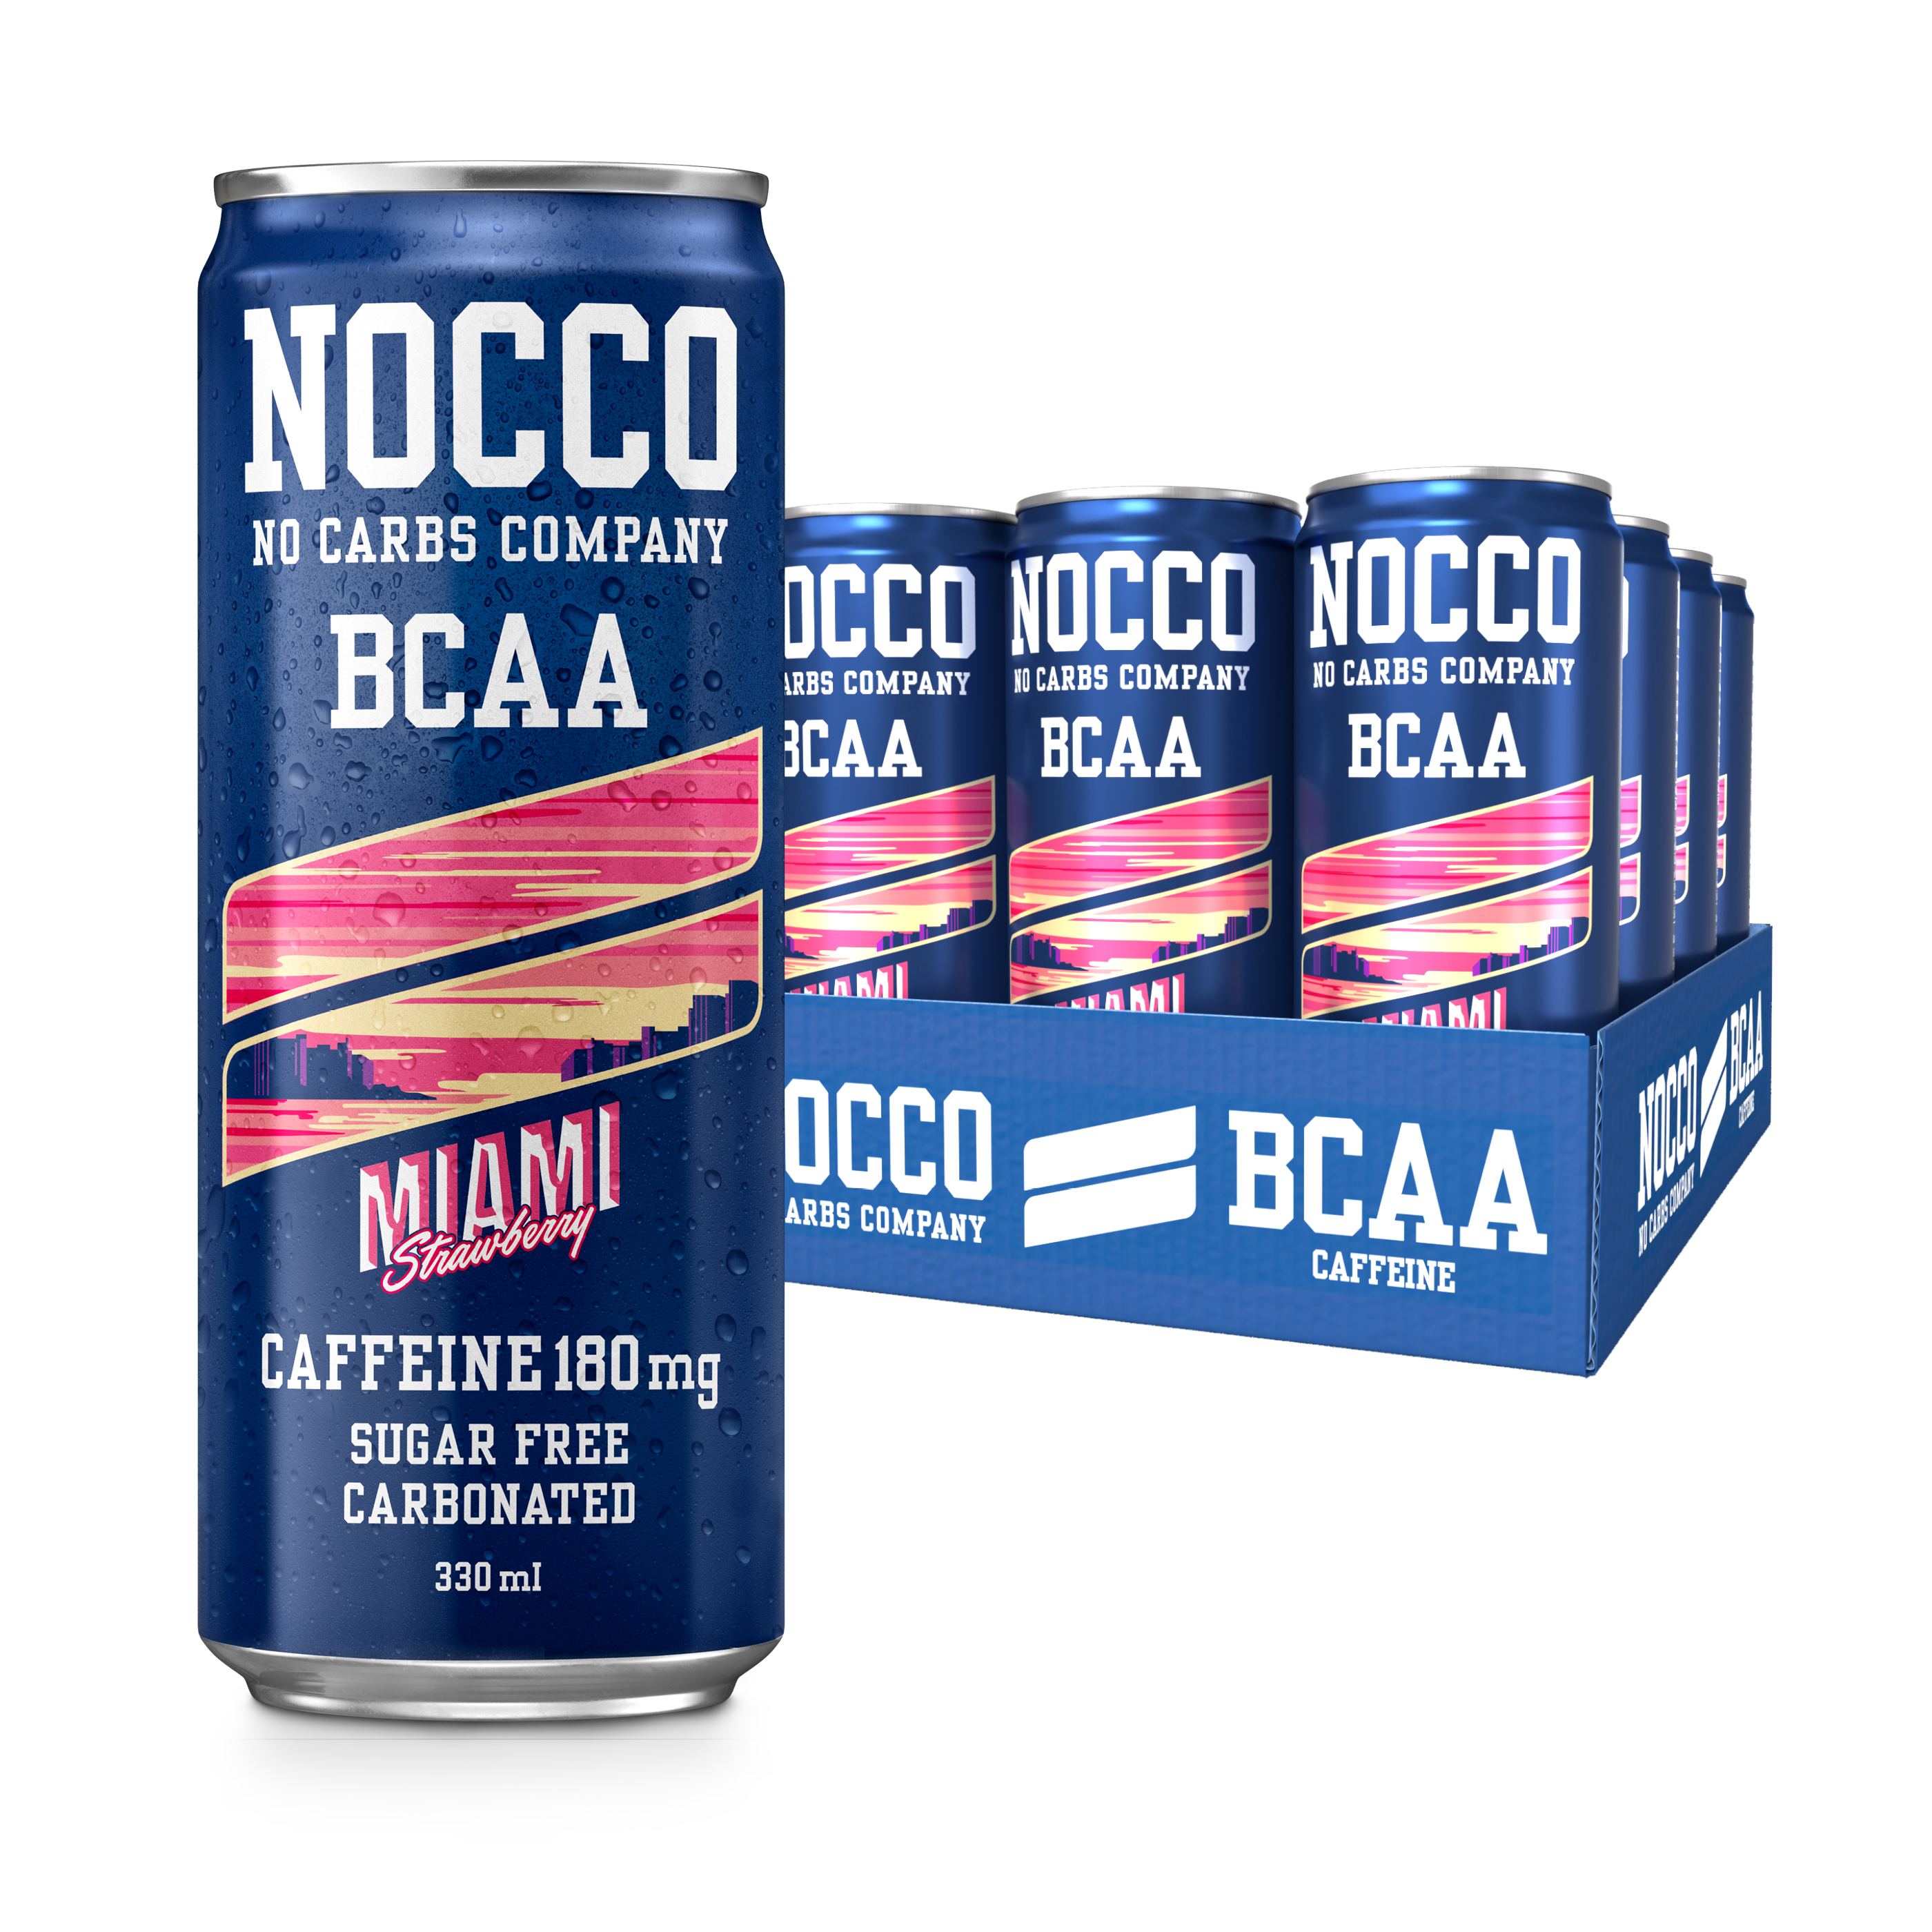 NOCCO – NOCCO BCAA is a beverage with BCAA and vitamins.